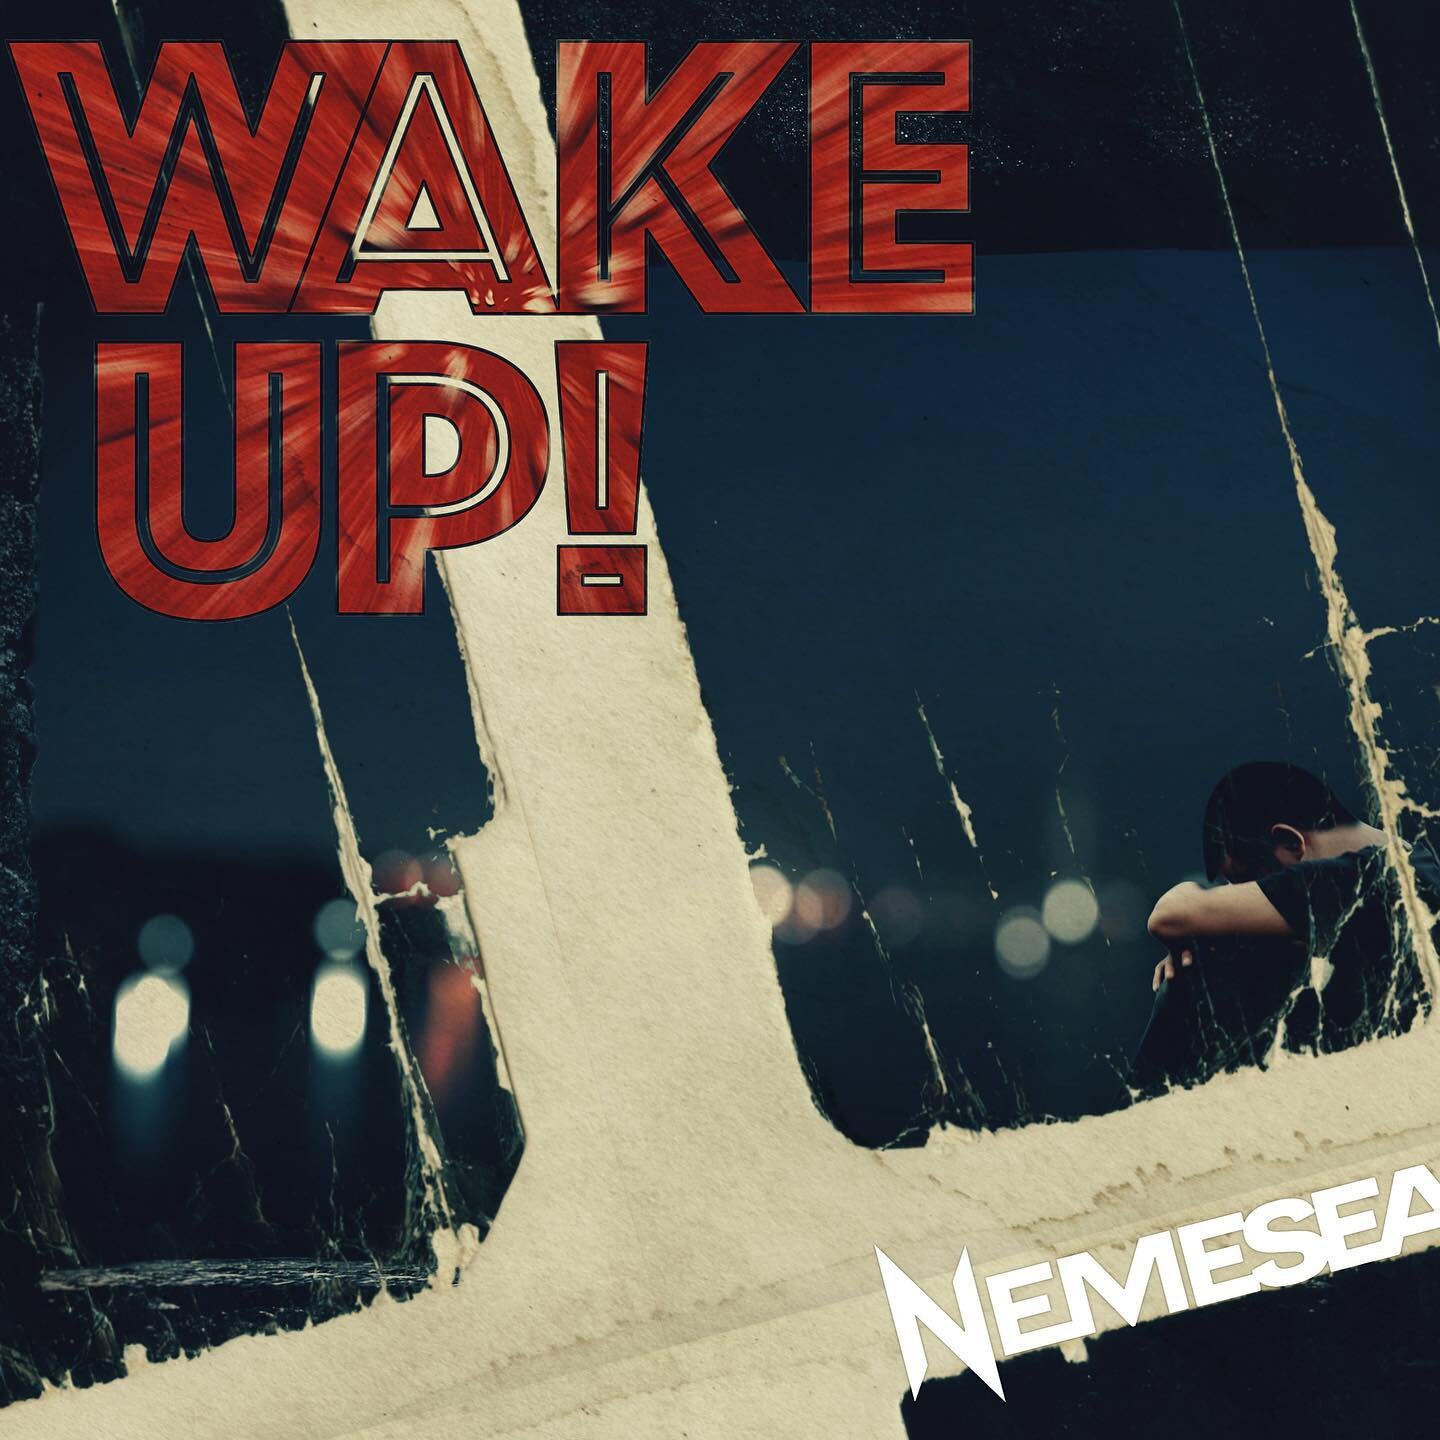 Hey all! Here is the artwork for the upcoming single WakeUP! (21-5-3020) 
Hope you like it. #repost if you like
.
.
.
.
.
.
.
#artwork #newsingle #wakeup #2020 #nemesea #nemeseaofficial #nemeseafans #spotifyplaylist #helsinki #groningen #groningencit